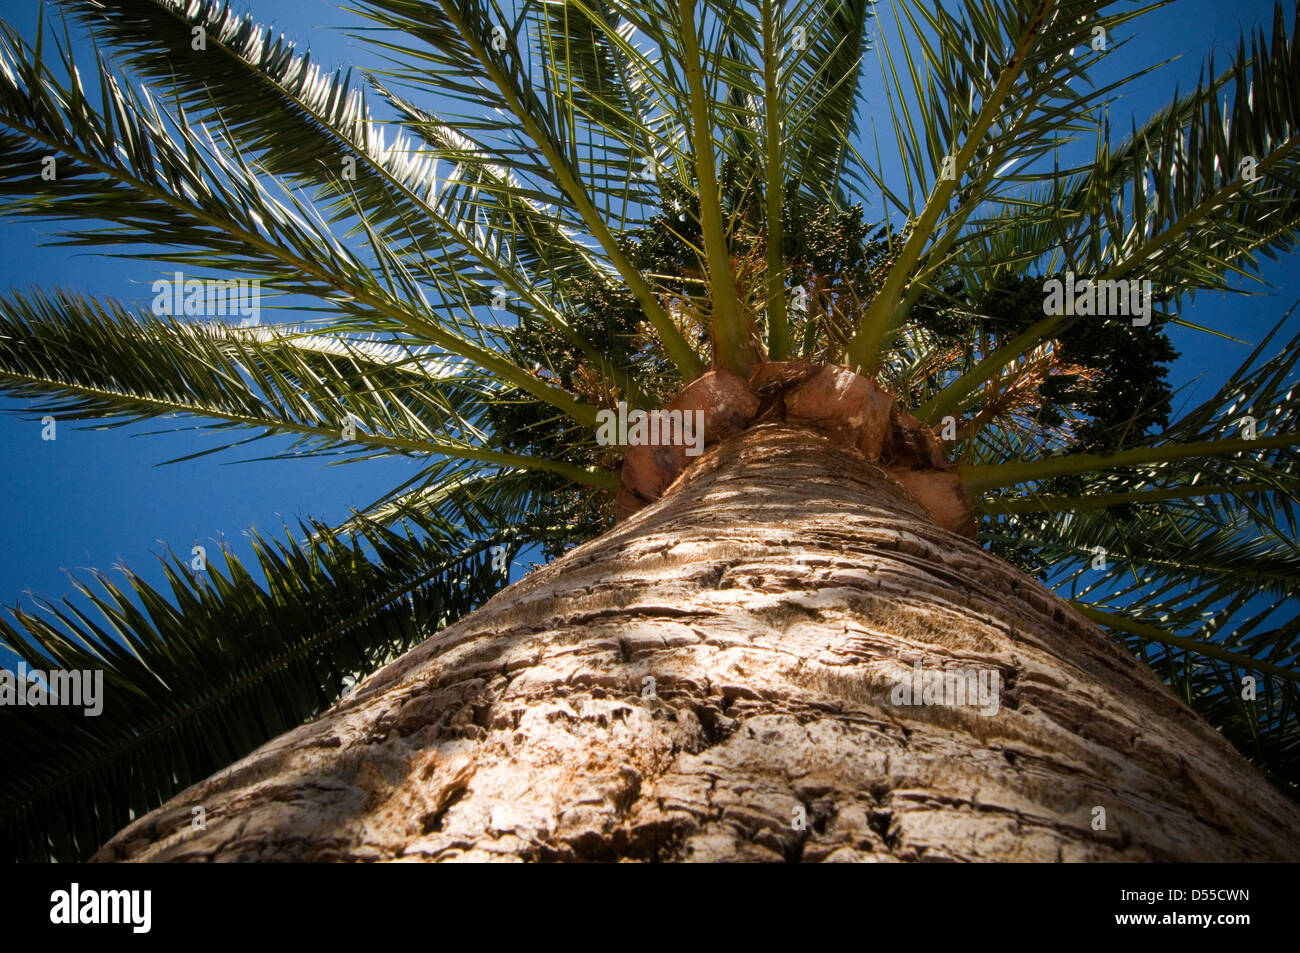 palm tree trees oil oils tropical island islands frond fronds leaves bark trunk blue sky Stock Photo